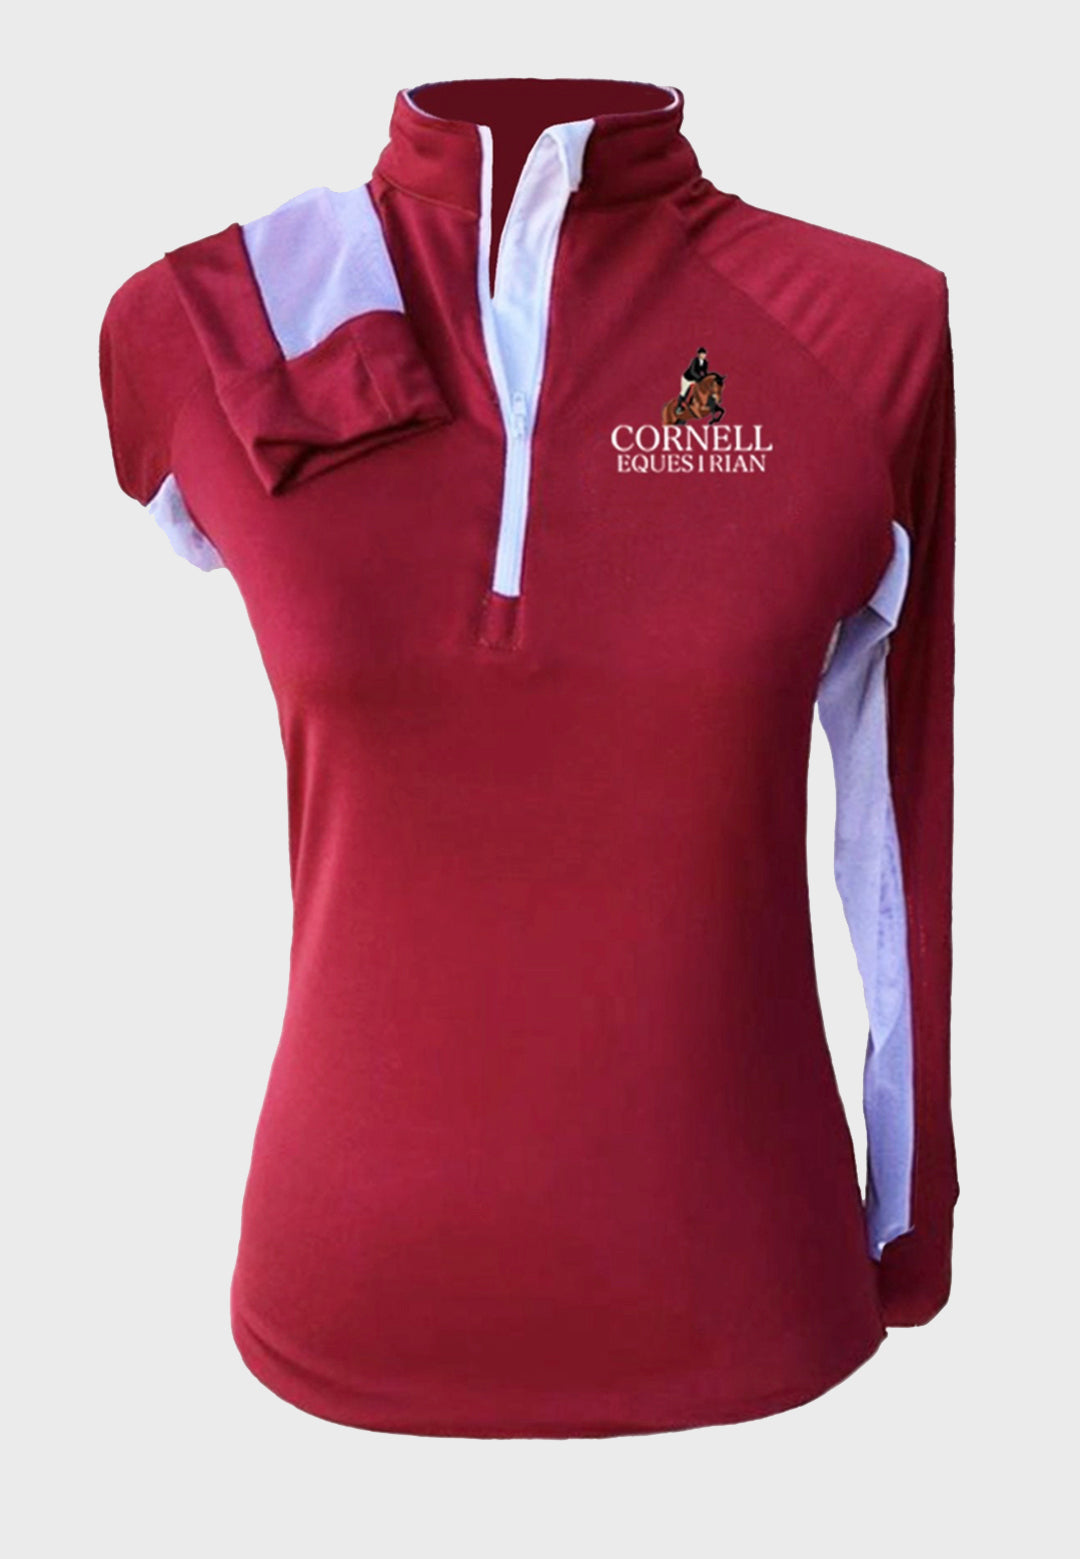 Cornell Equestrian Adult Custom Sun Shirt - Red with White Accents